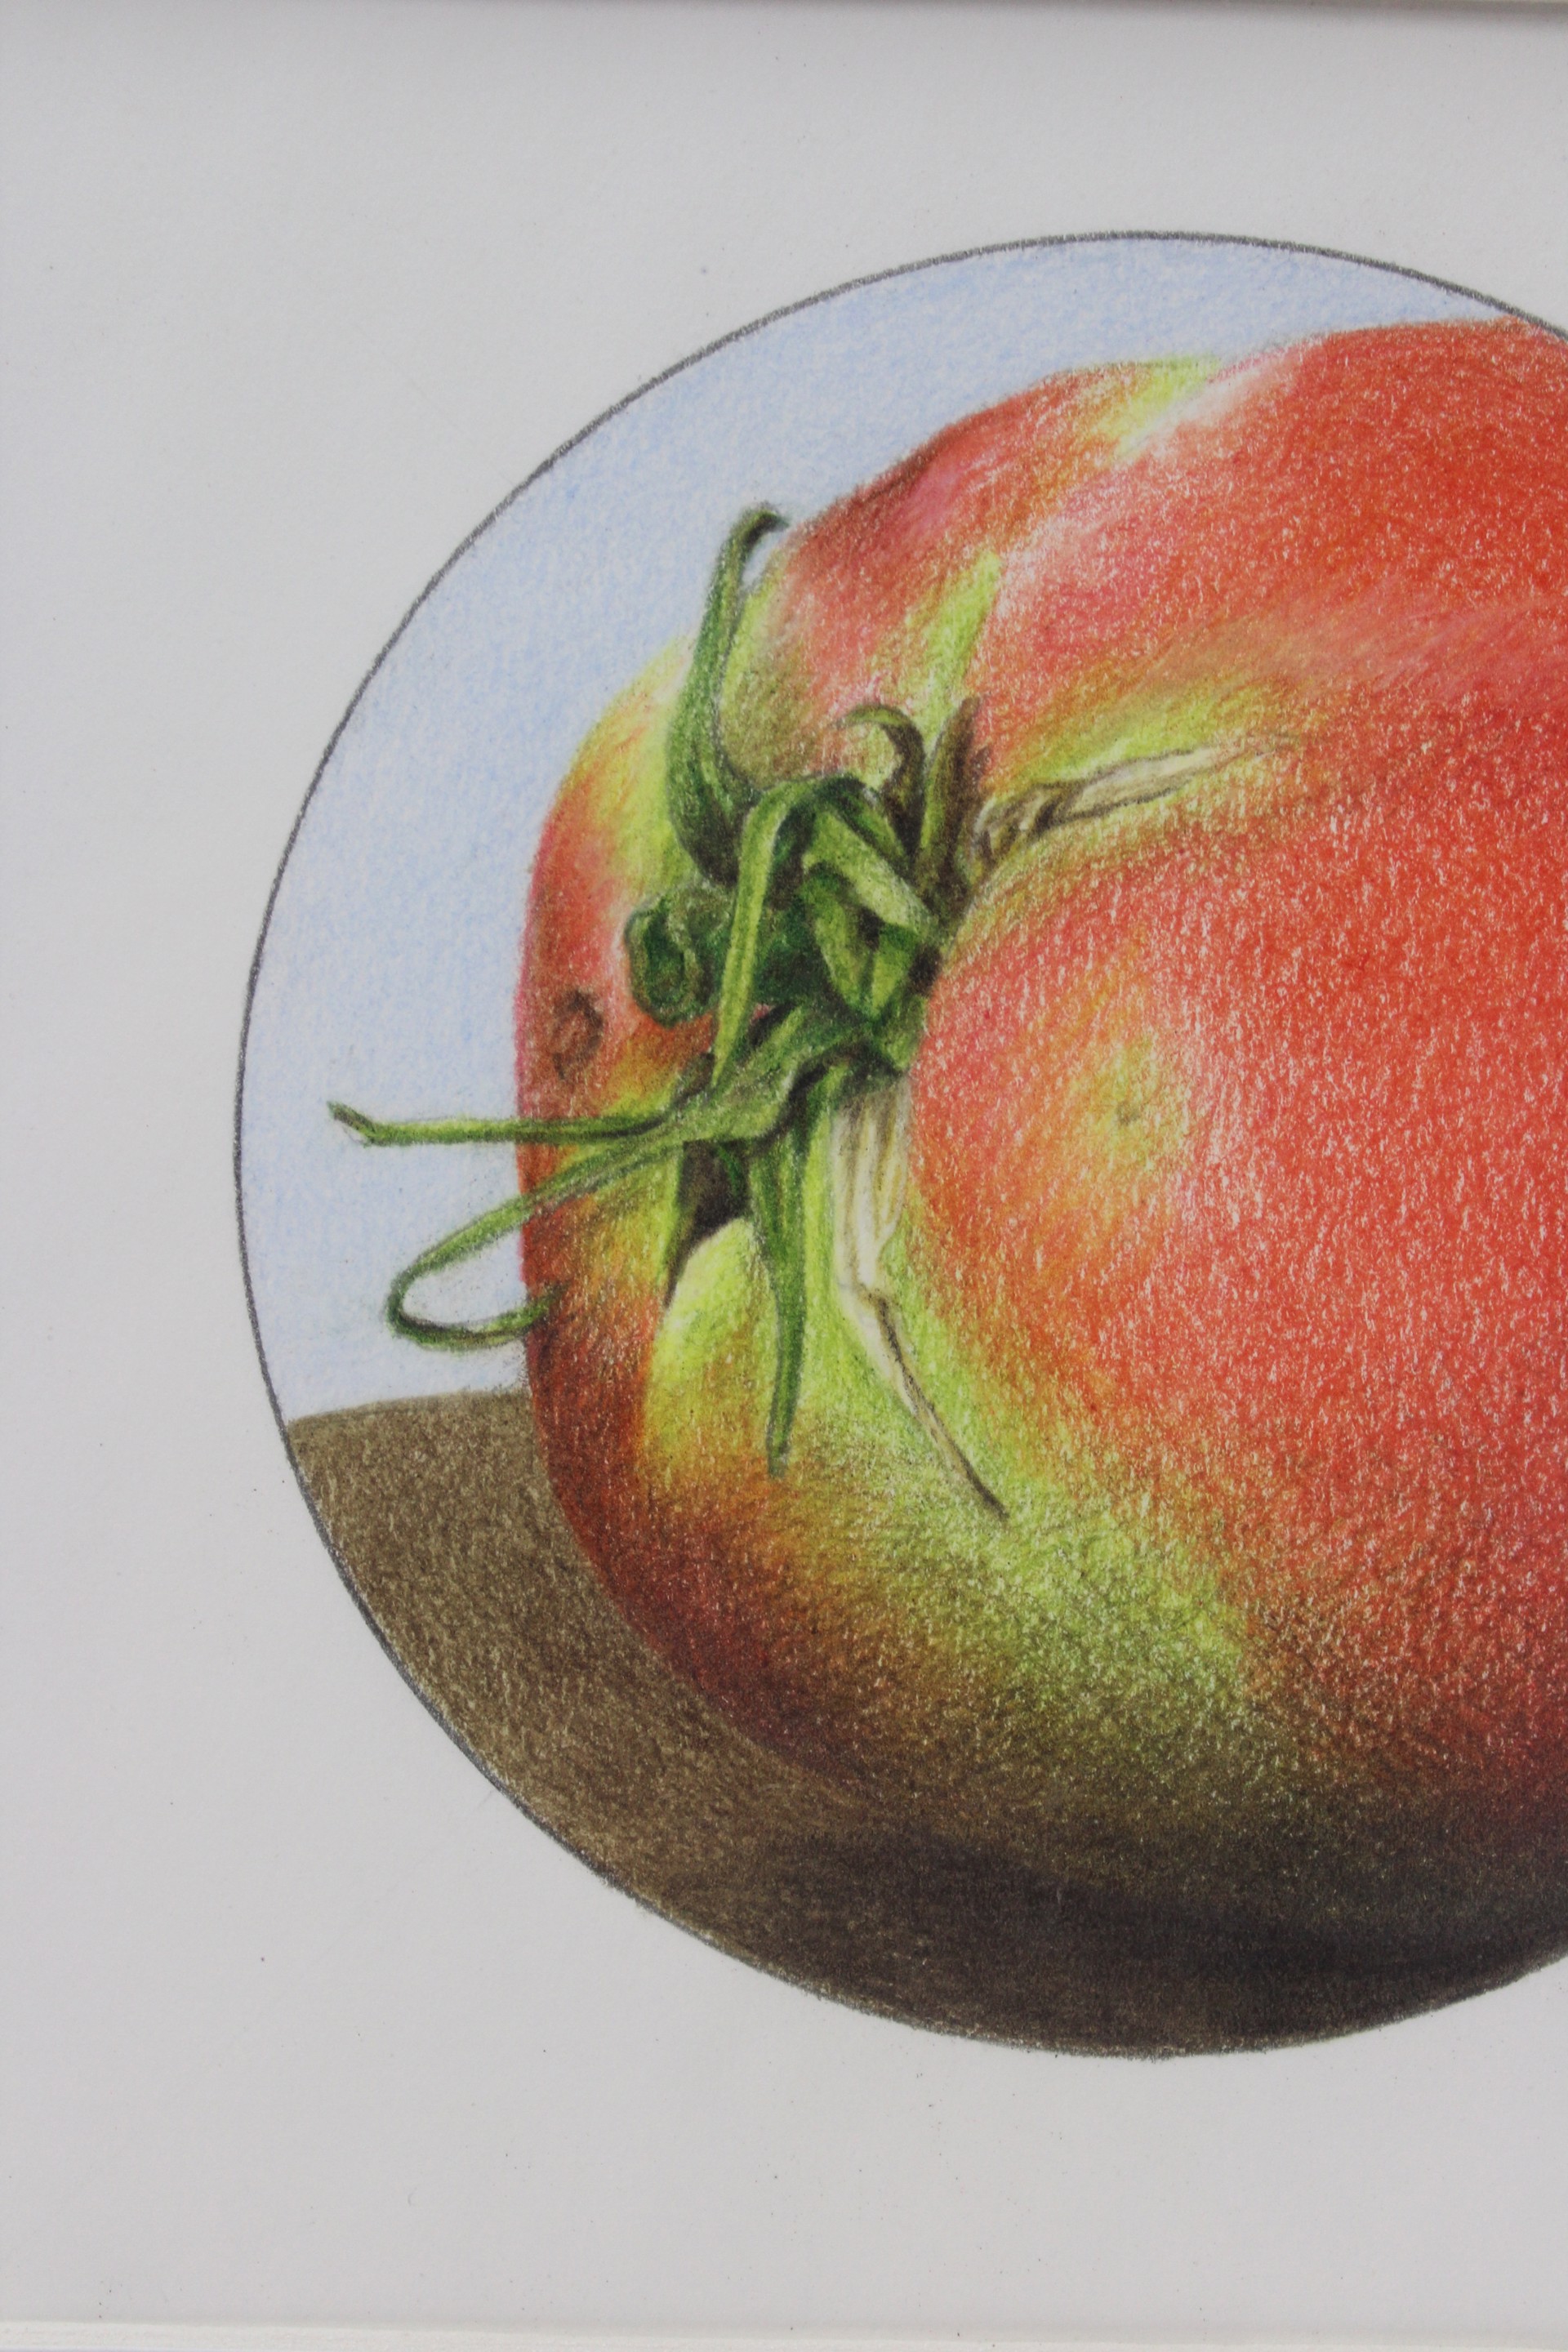 Tomato by Mary Lee Eggart